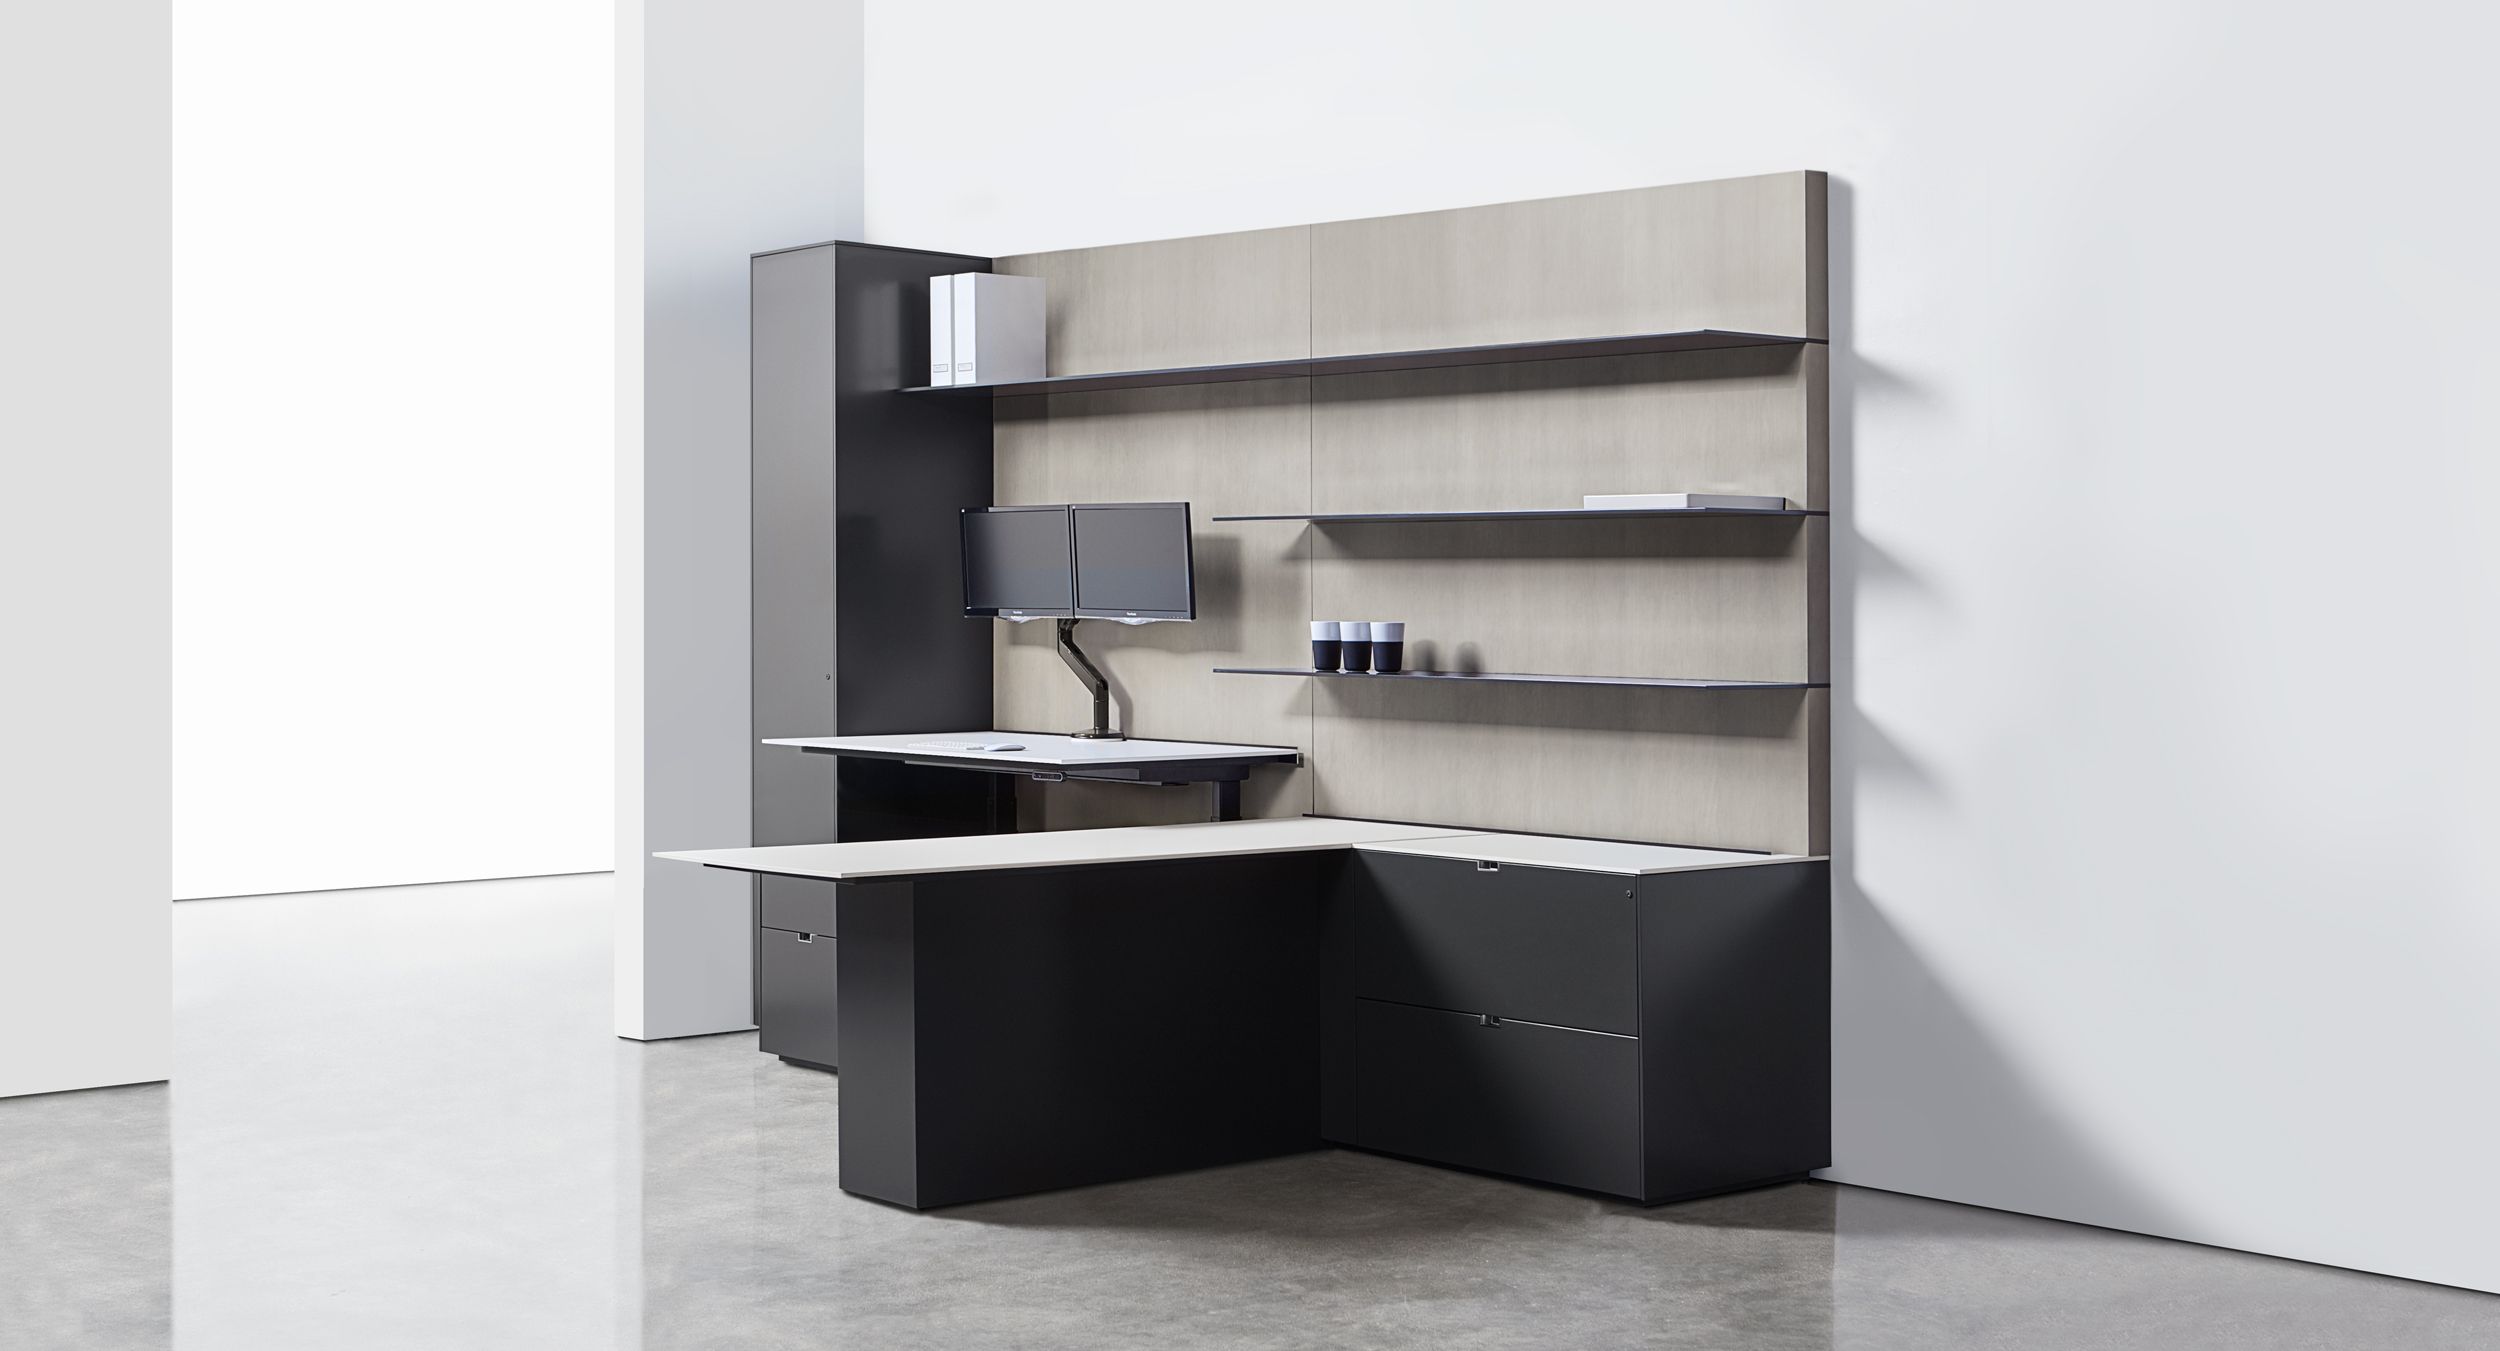 Adjustable-height surfaces combine with clean lines for integrated functionality.